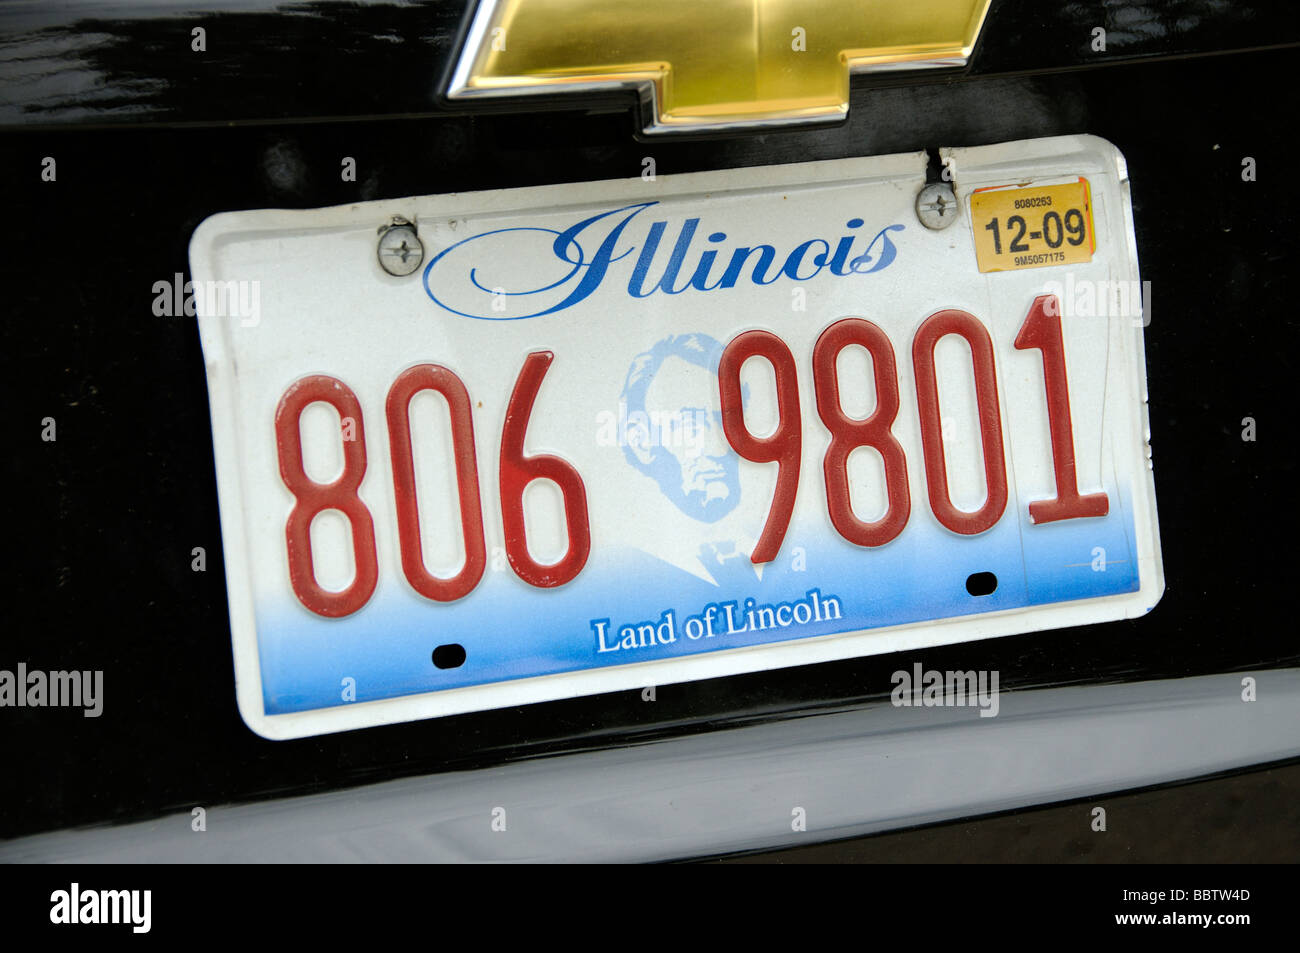 Car registration plate Land of Lincoln Illinois USA Stock Photo